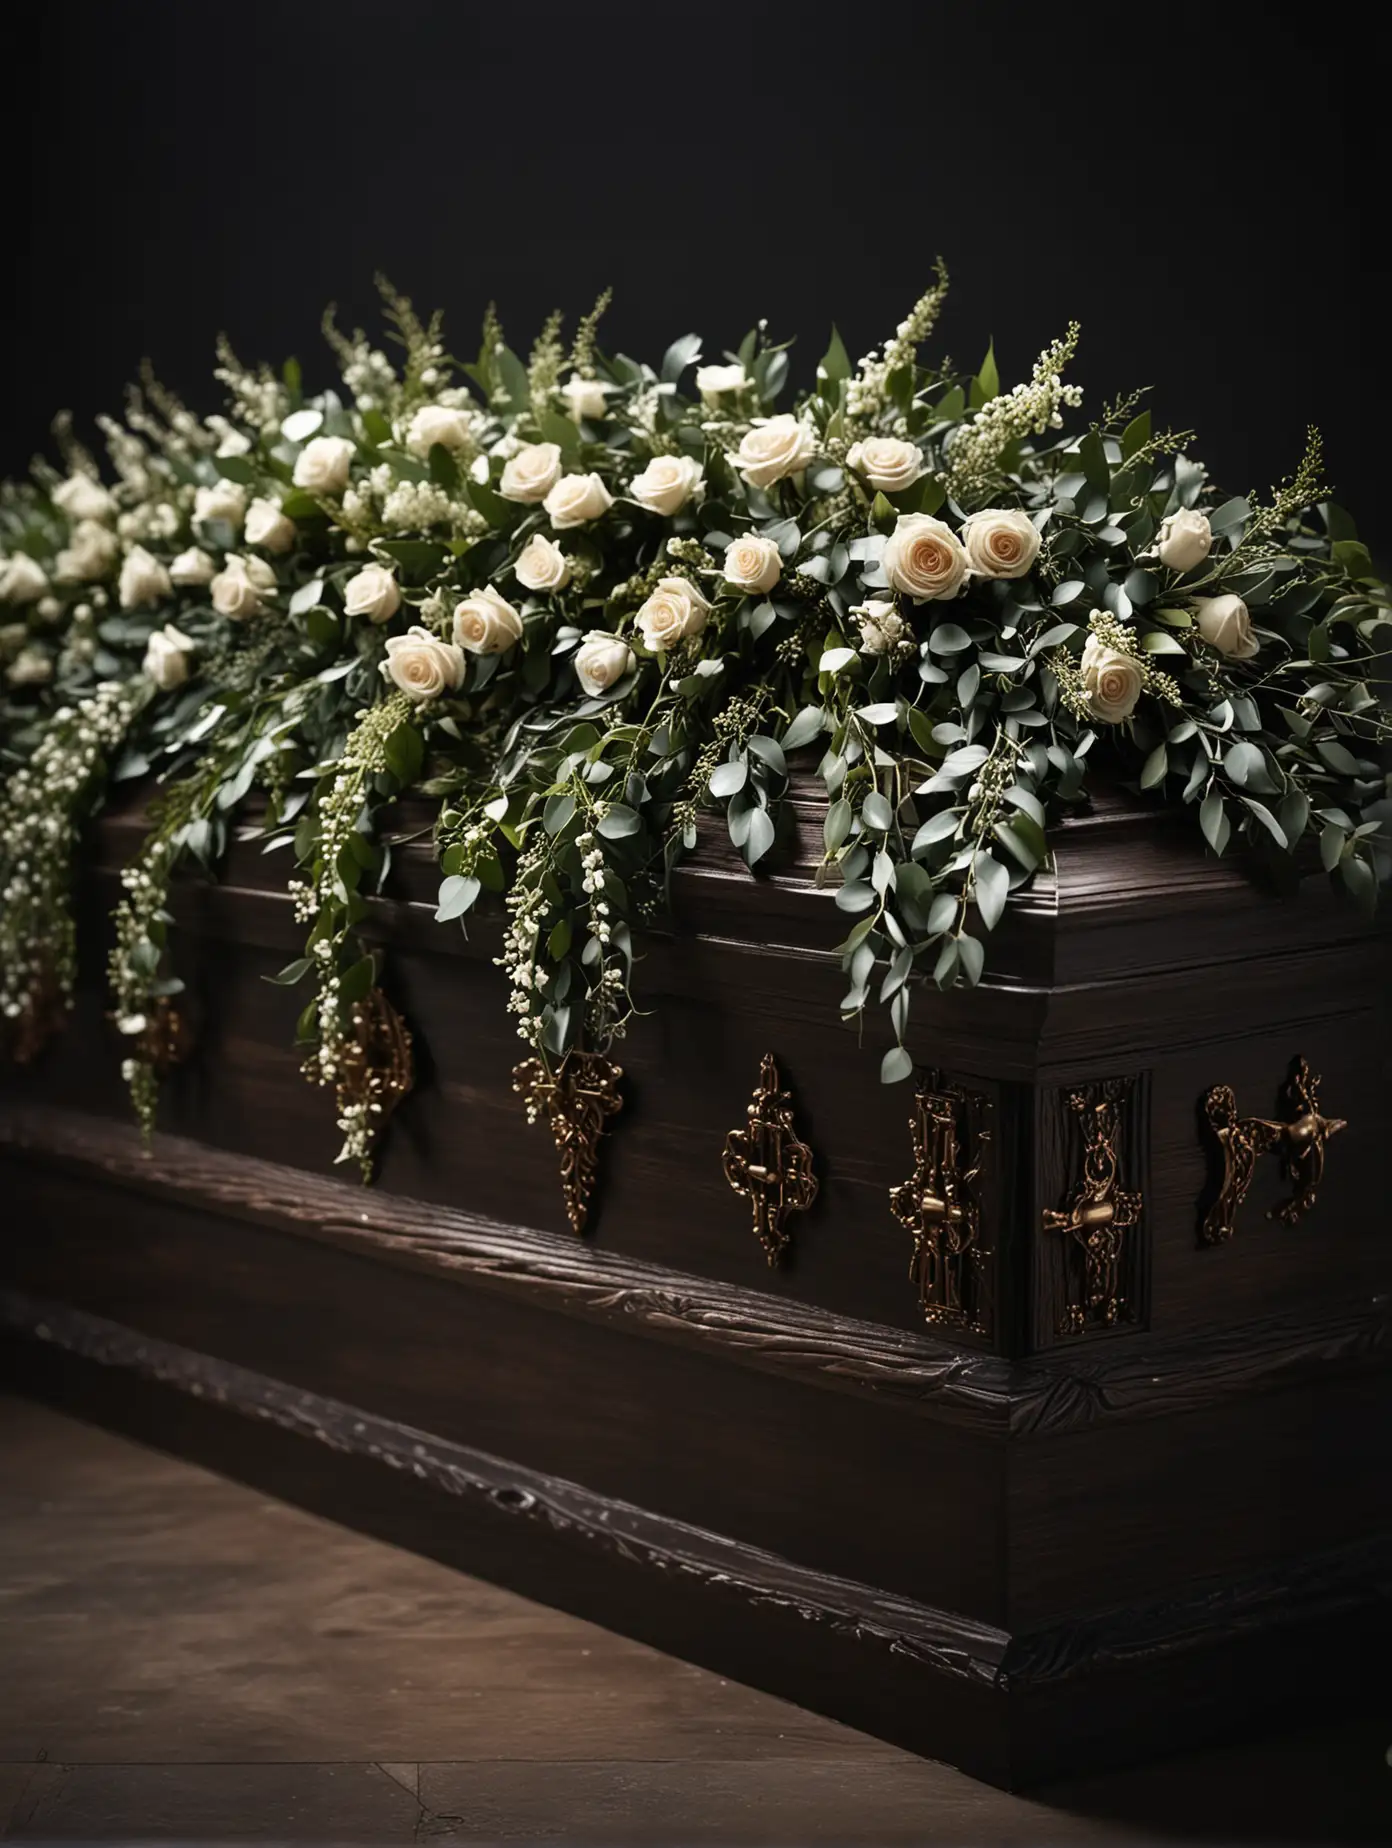 single dark bokeh light source, fragment of modern elegant coffin standing on a catafalque, callae lying on the coffin, coffin seen sideways at a sharp angle in perspective, solid blurred dark background